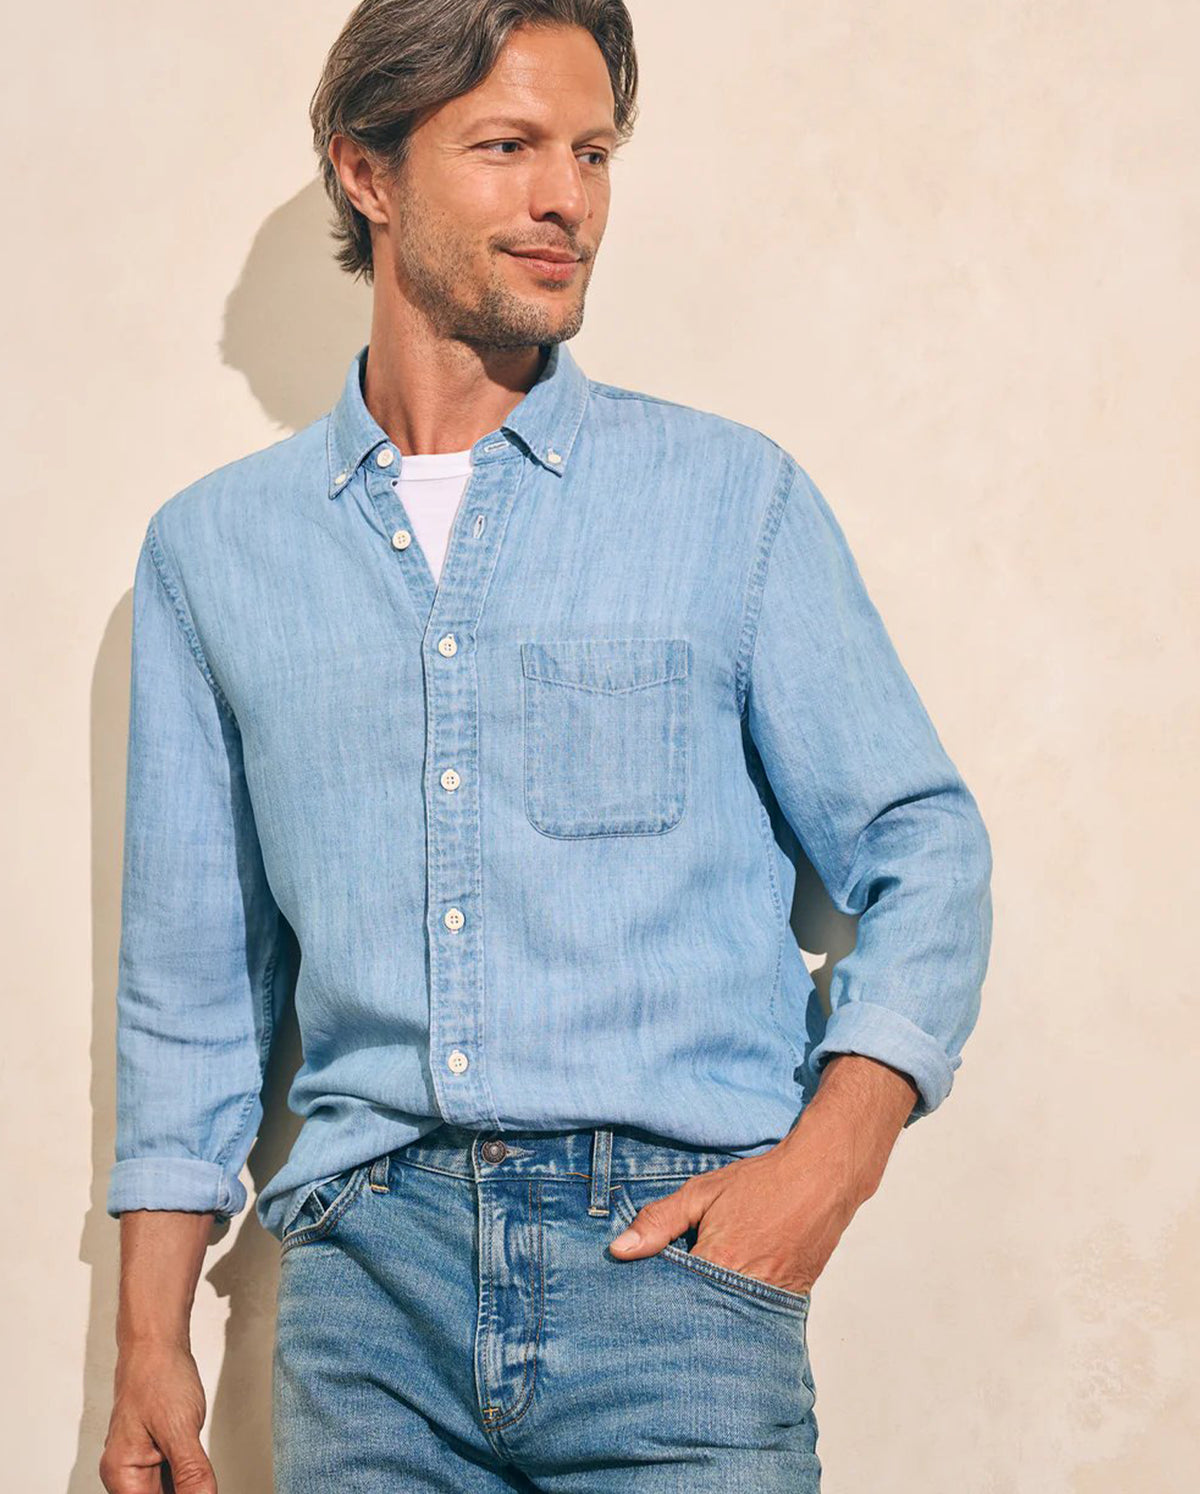 The Tried And True Chambray Shirt - Vintage Indigo